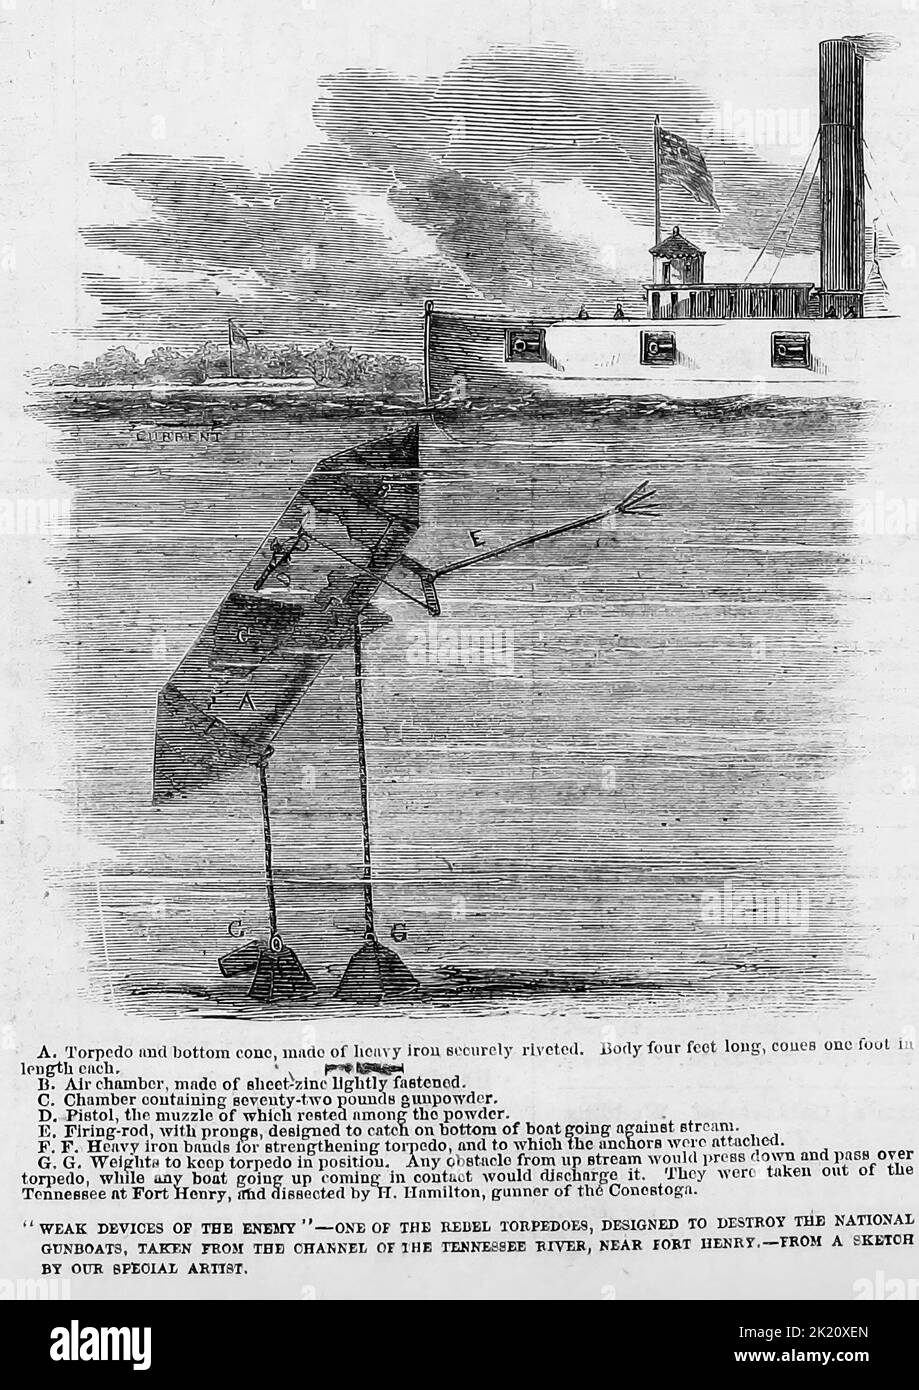 'Weak devices of the enemy' - One of the Rebel torpedoes, designed to destroy the National gunboats, taken from the channel of the Tennessee River, near Fort Henry. March 1862. 19th century American Civil War illustration from Frank Leslie's Illustrated Newspaper Stock Photo